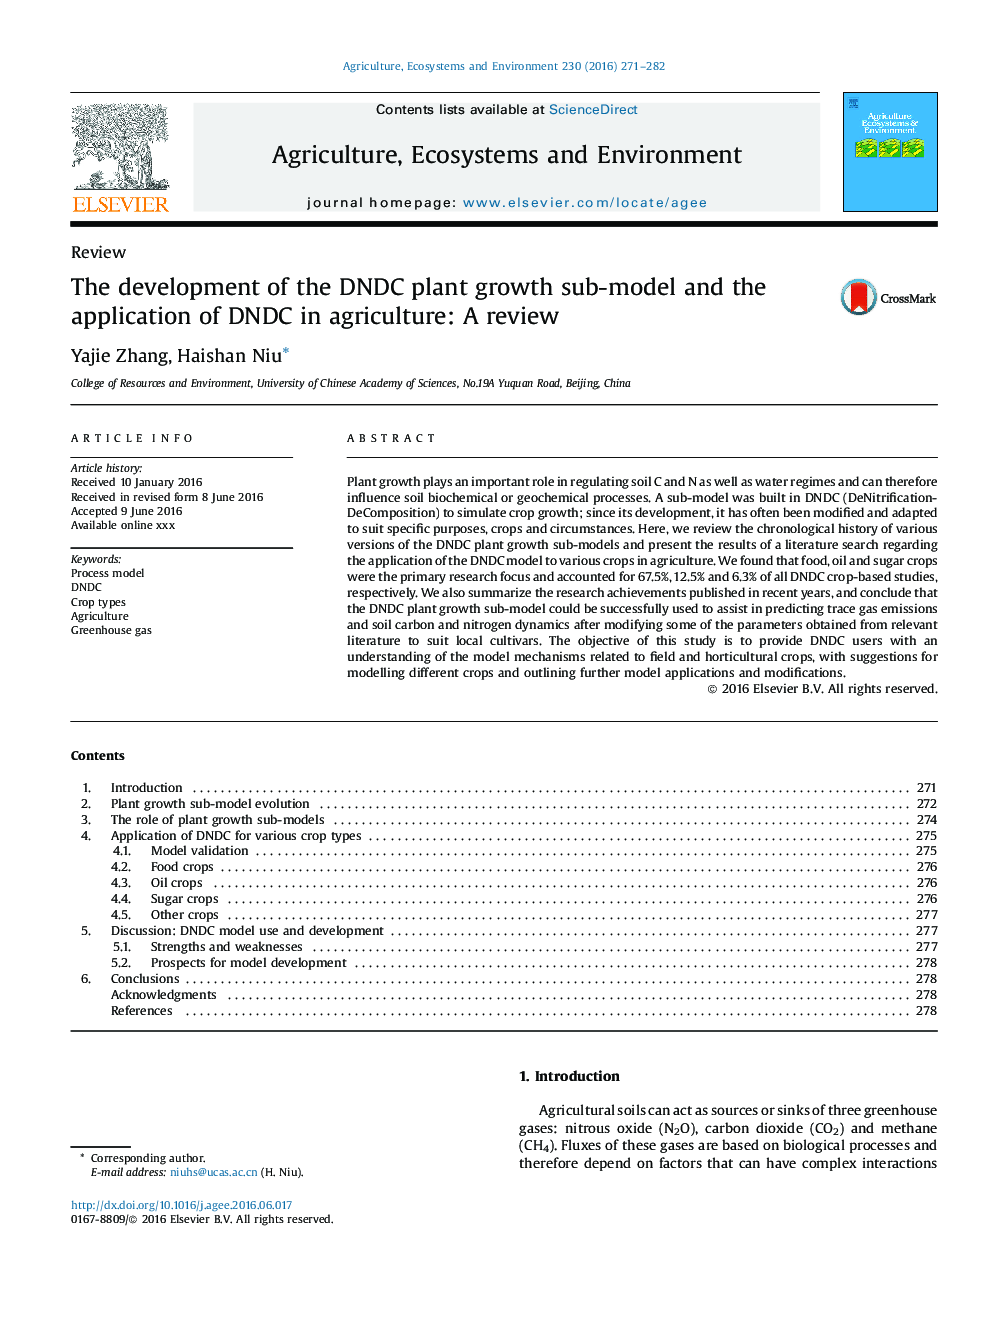 The development of the DNDC plant growth sub-model and the application of DNDC in agriculture: A review